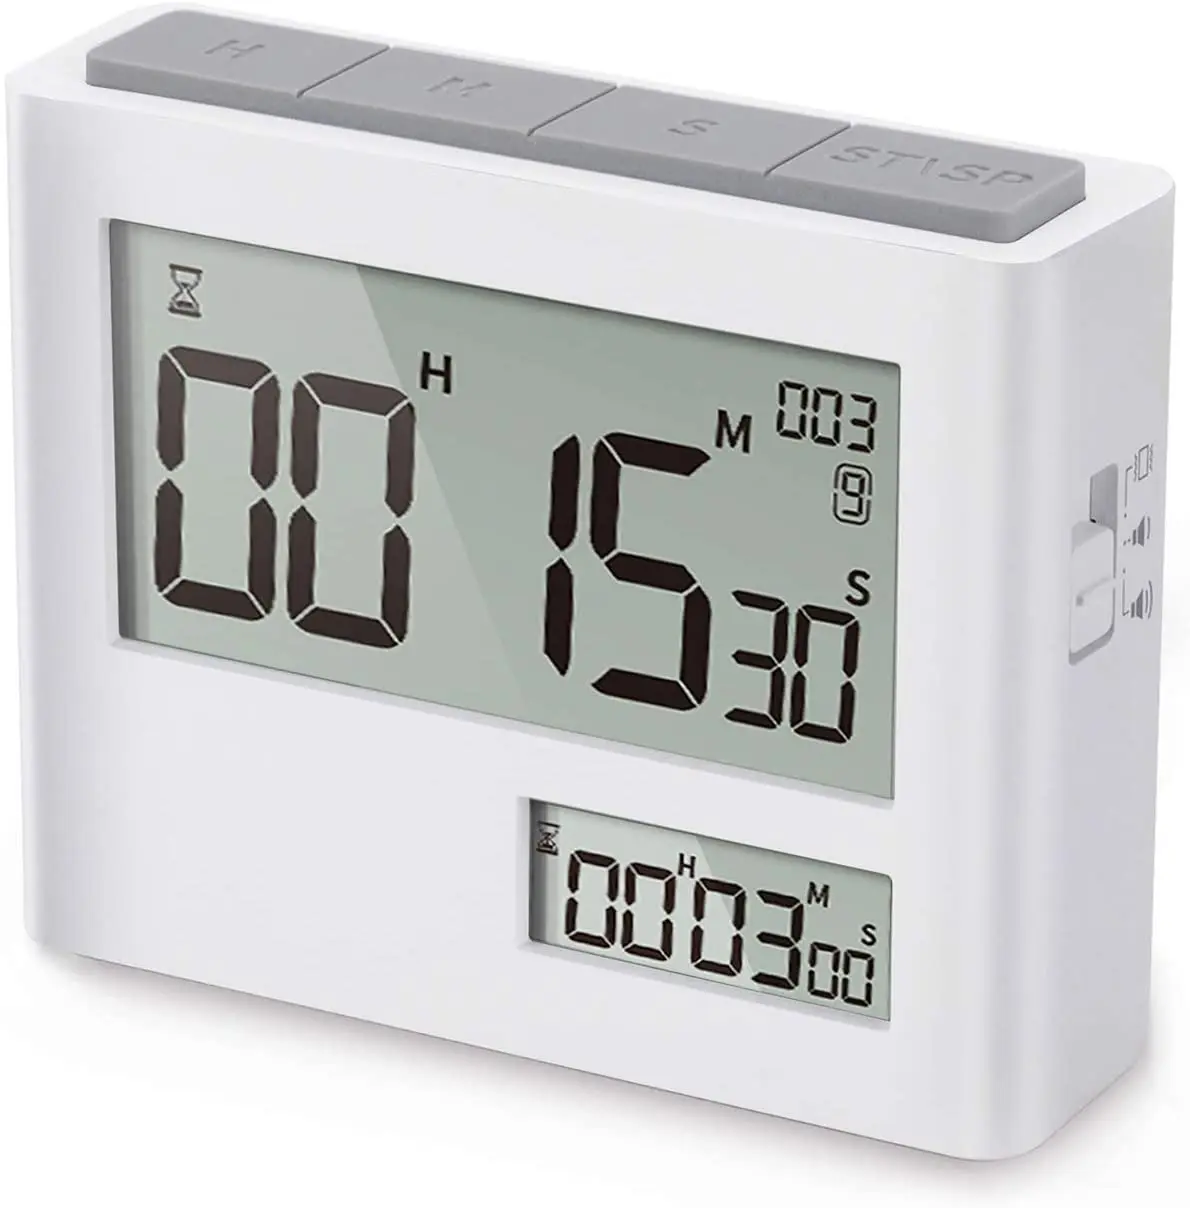 Portable Dual Display Channel Digital LCD Magnetic Countdown Clock Alarm Timer